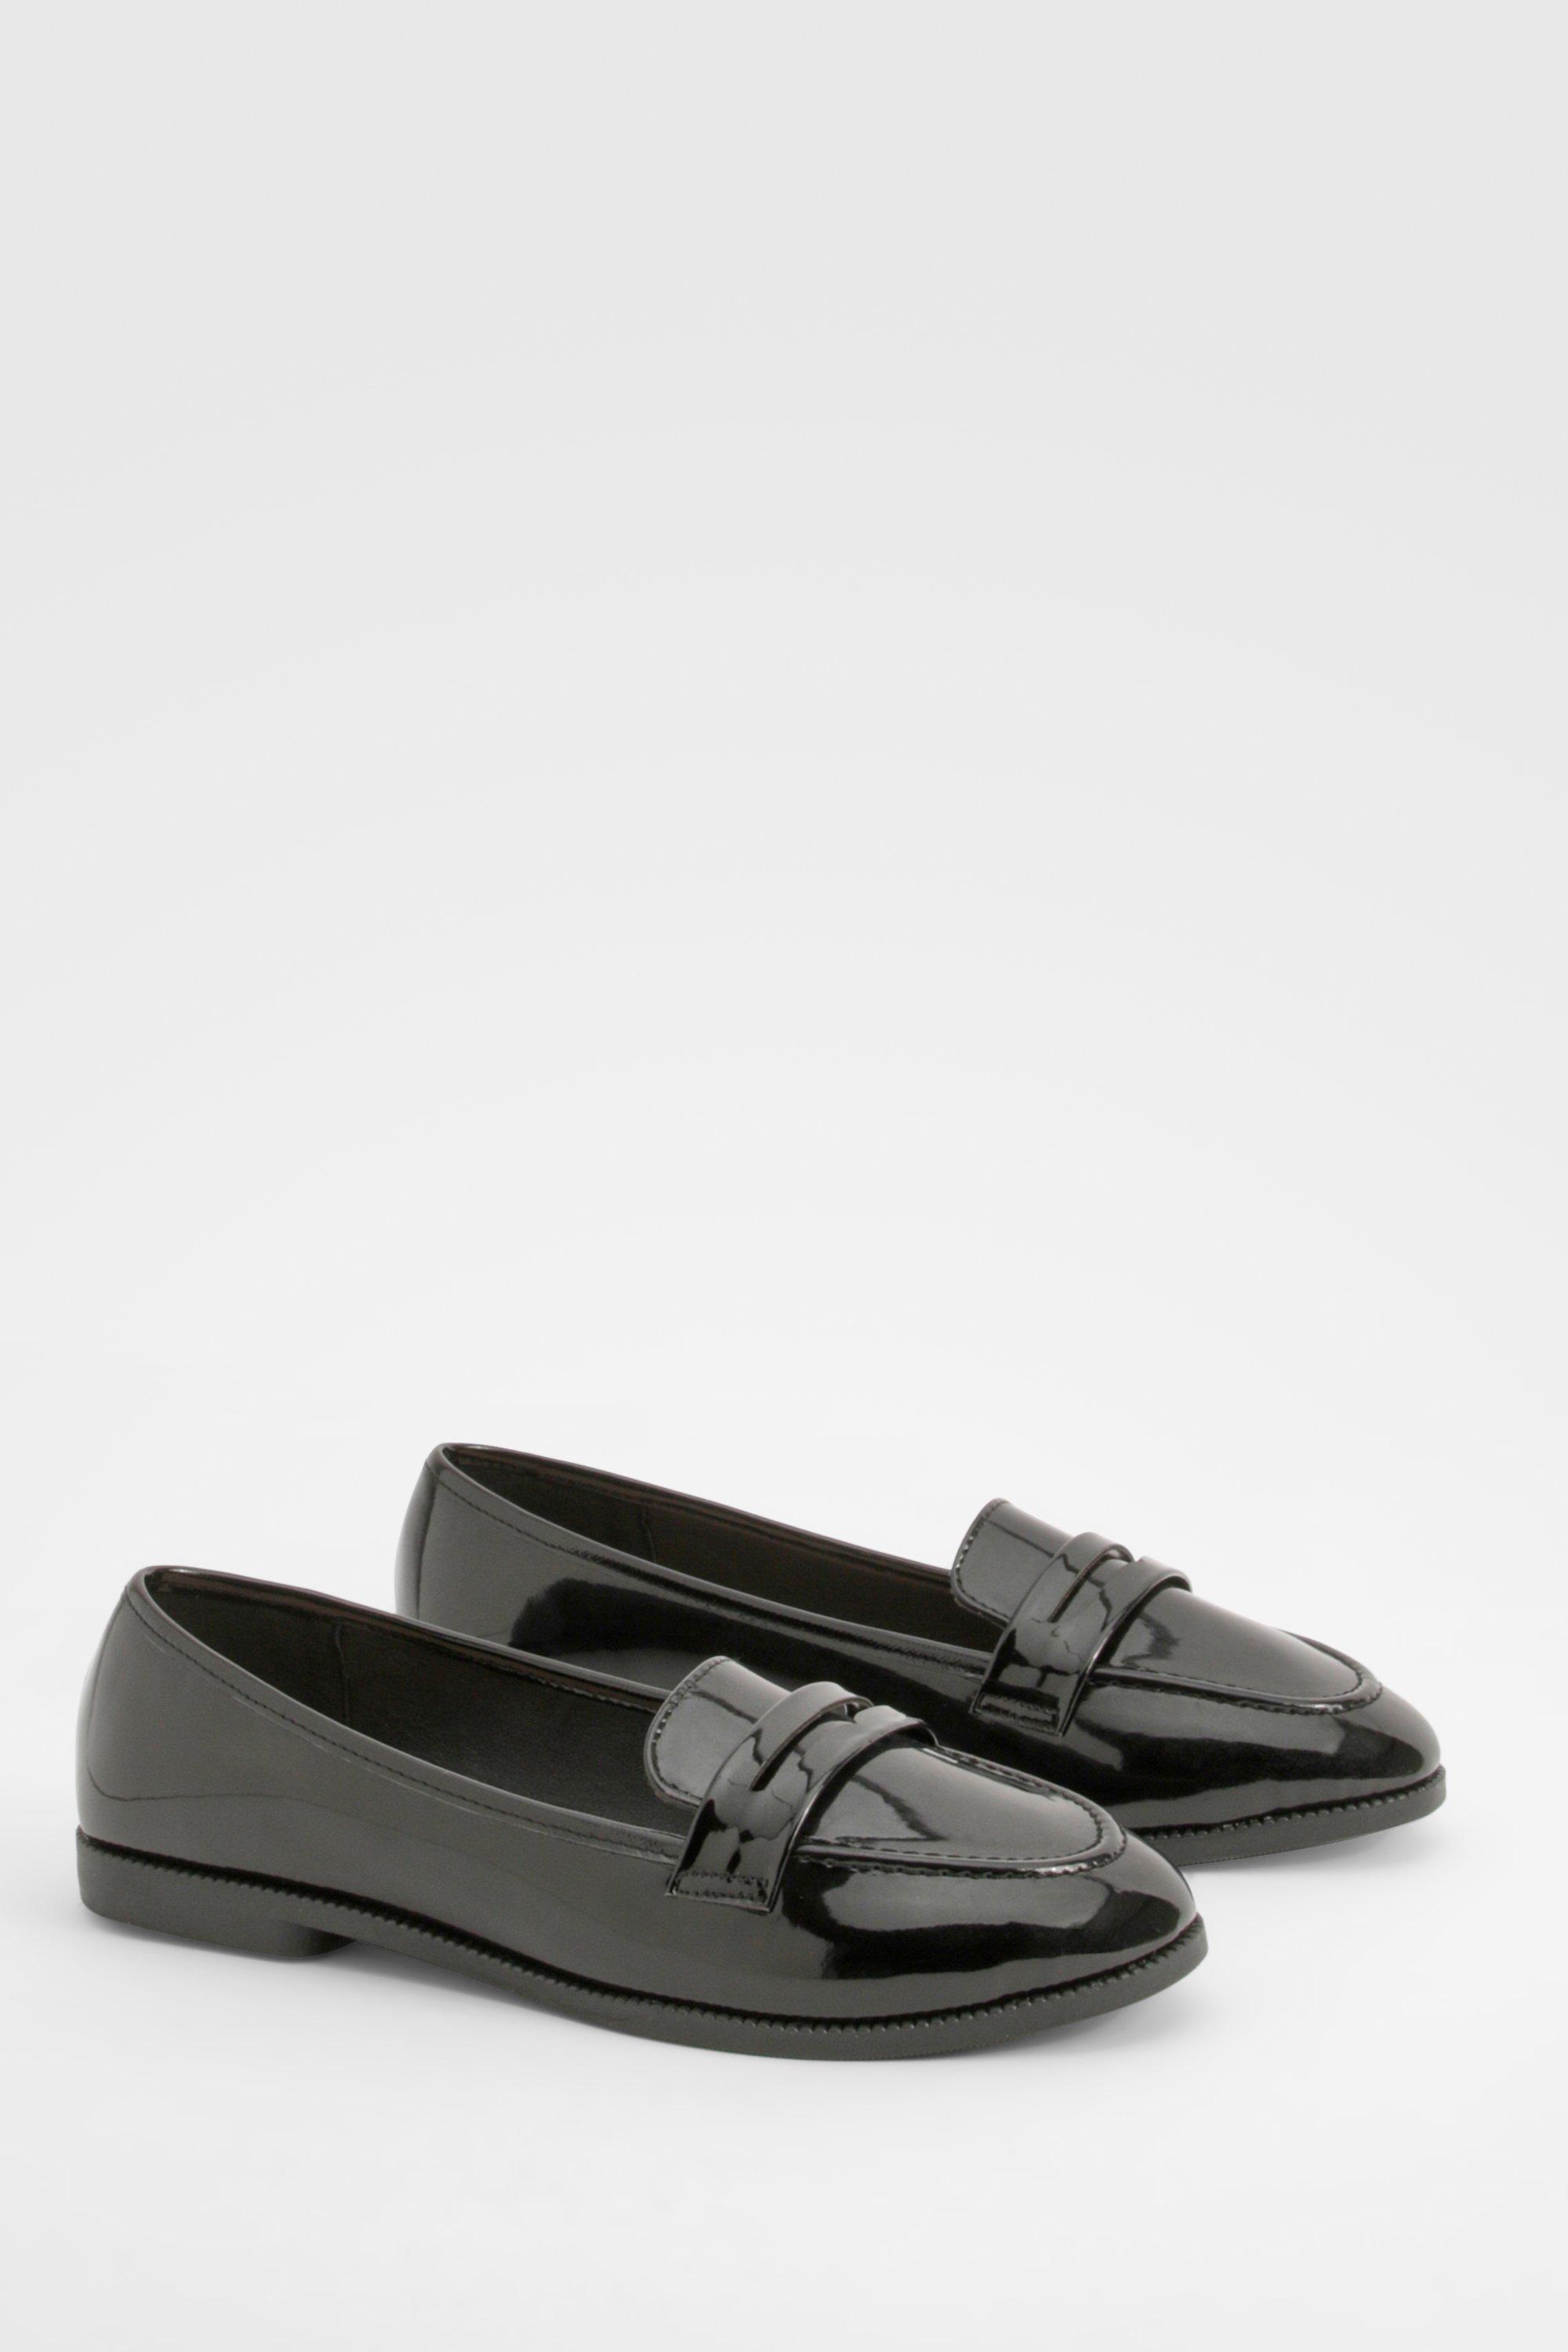 Boohoo Wide Fit Patent Loafers, Black